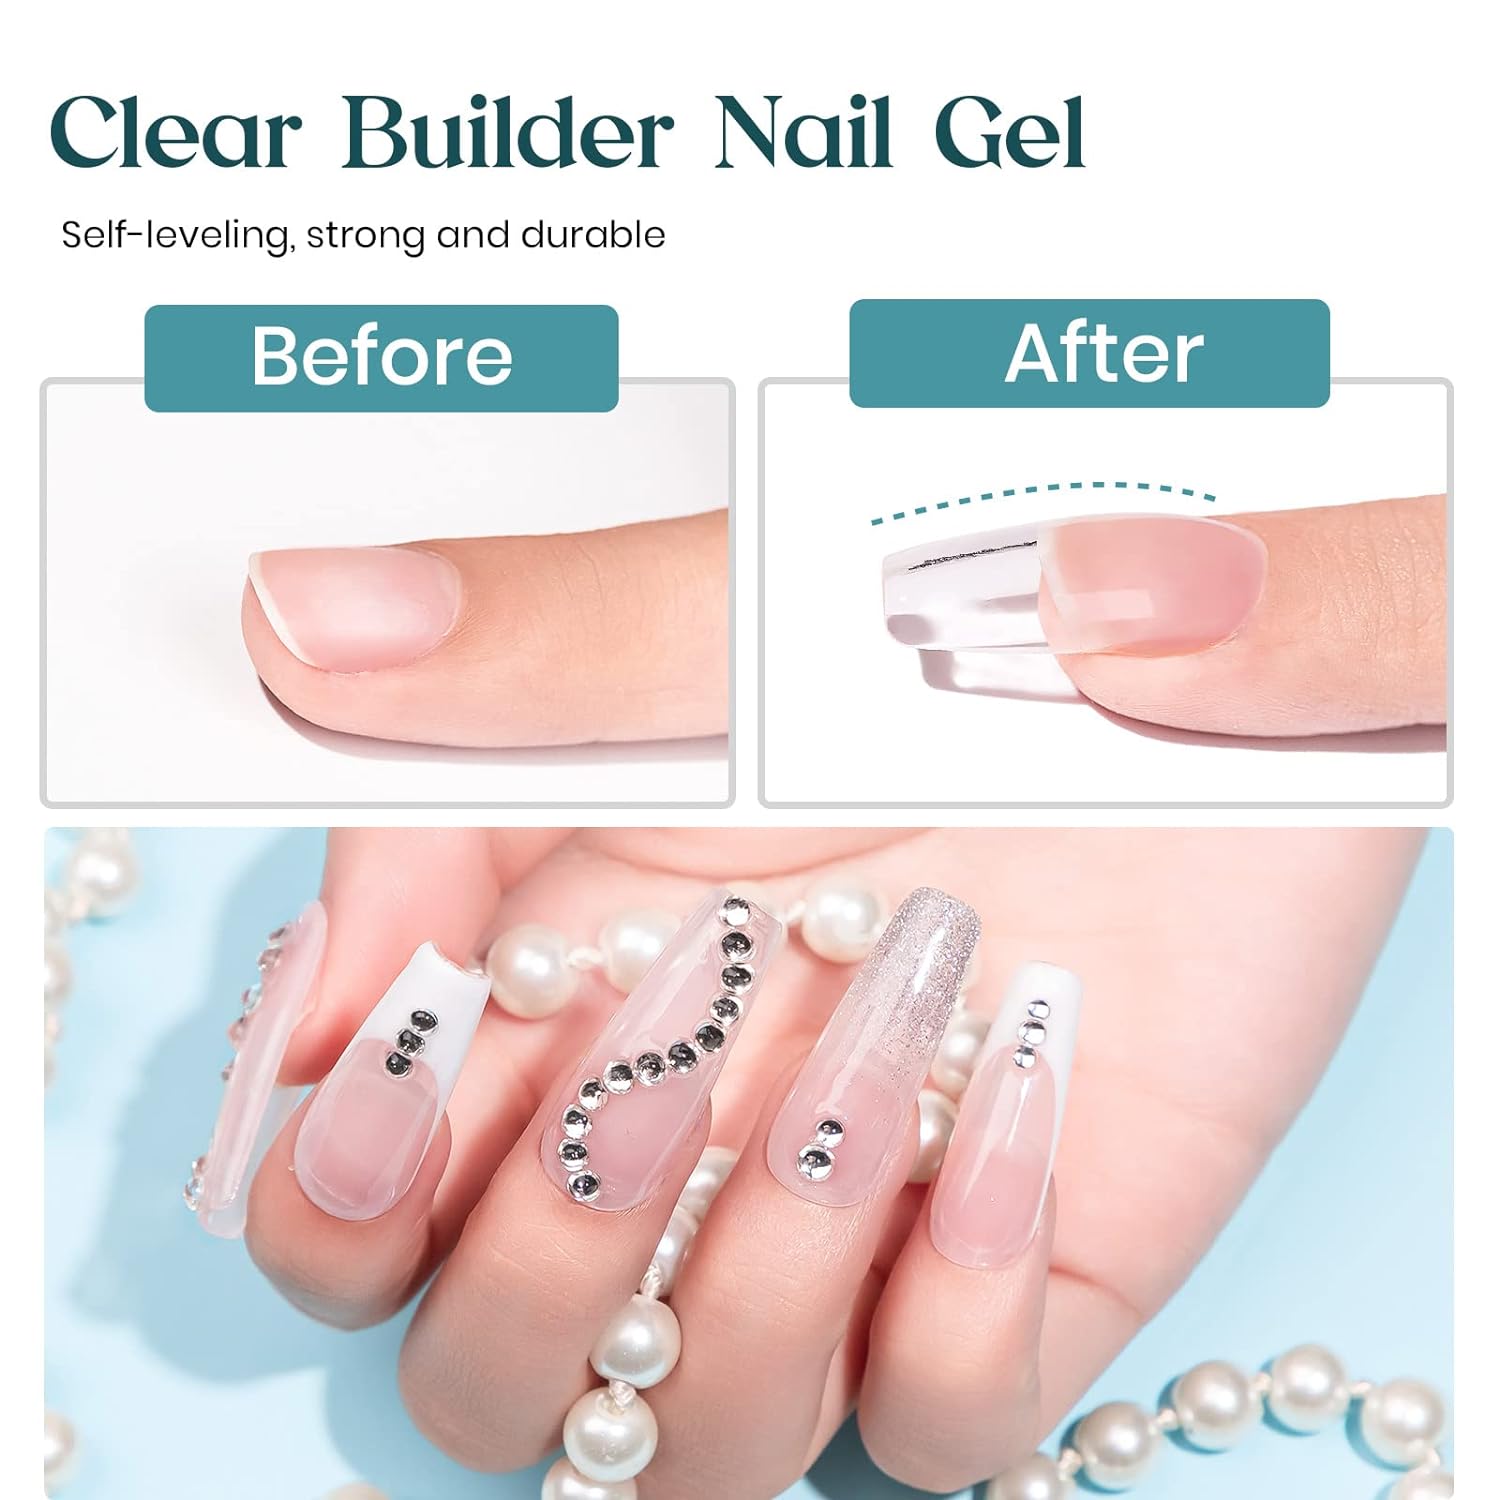 Builder Gel for Nails - 60G Clear Hard Gel Builder Nail Gel for Nail Extension Gel Nail Strengthen Nail Art Manicure Kit with 100Pcs Nail Forms and Brush - HealthFulBeautyLife